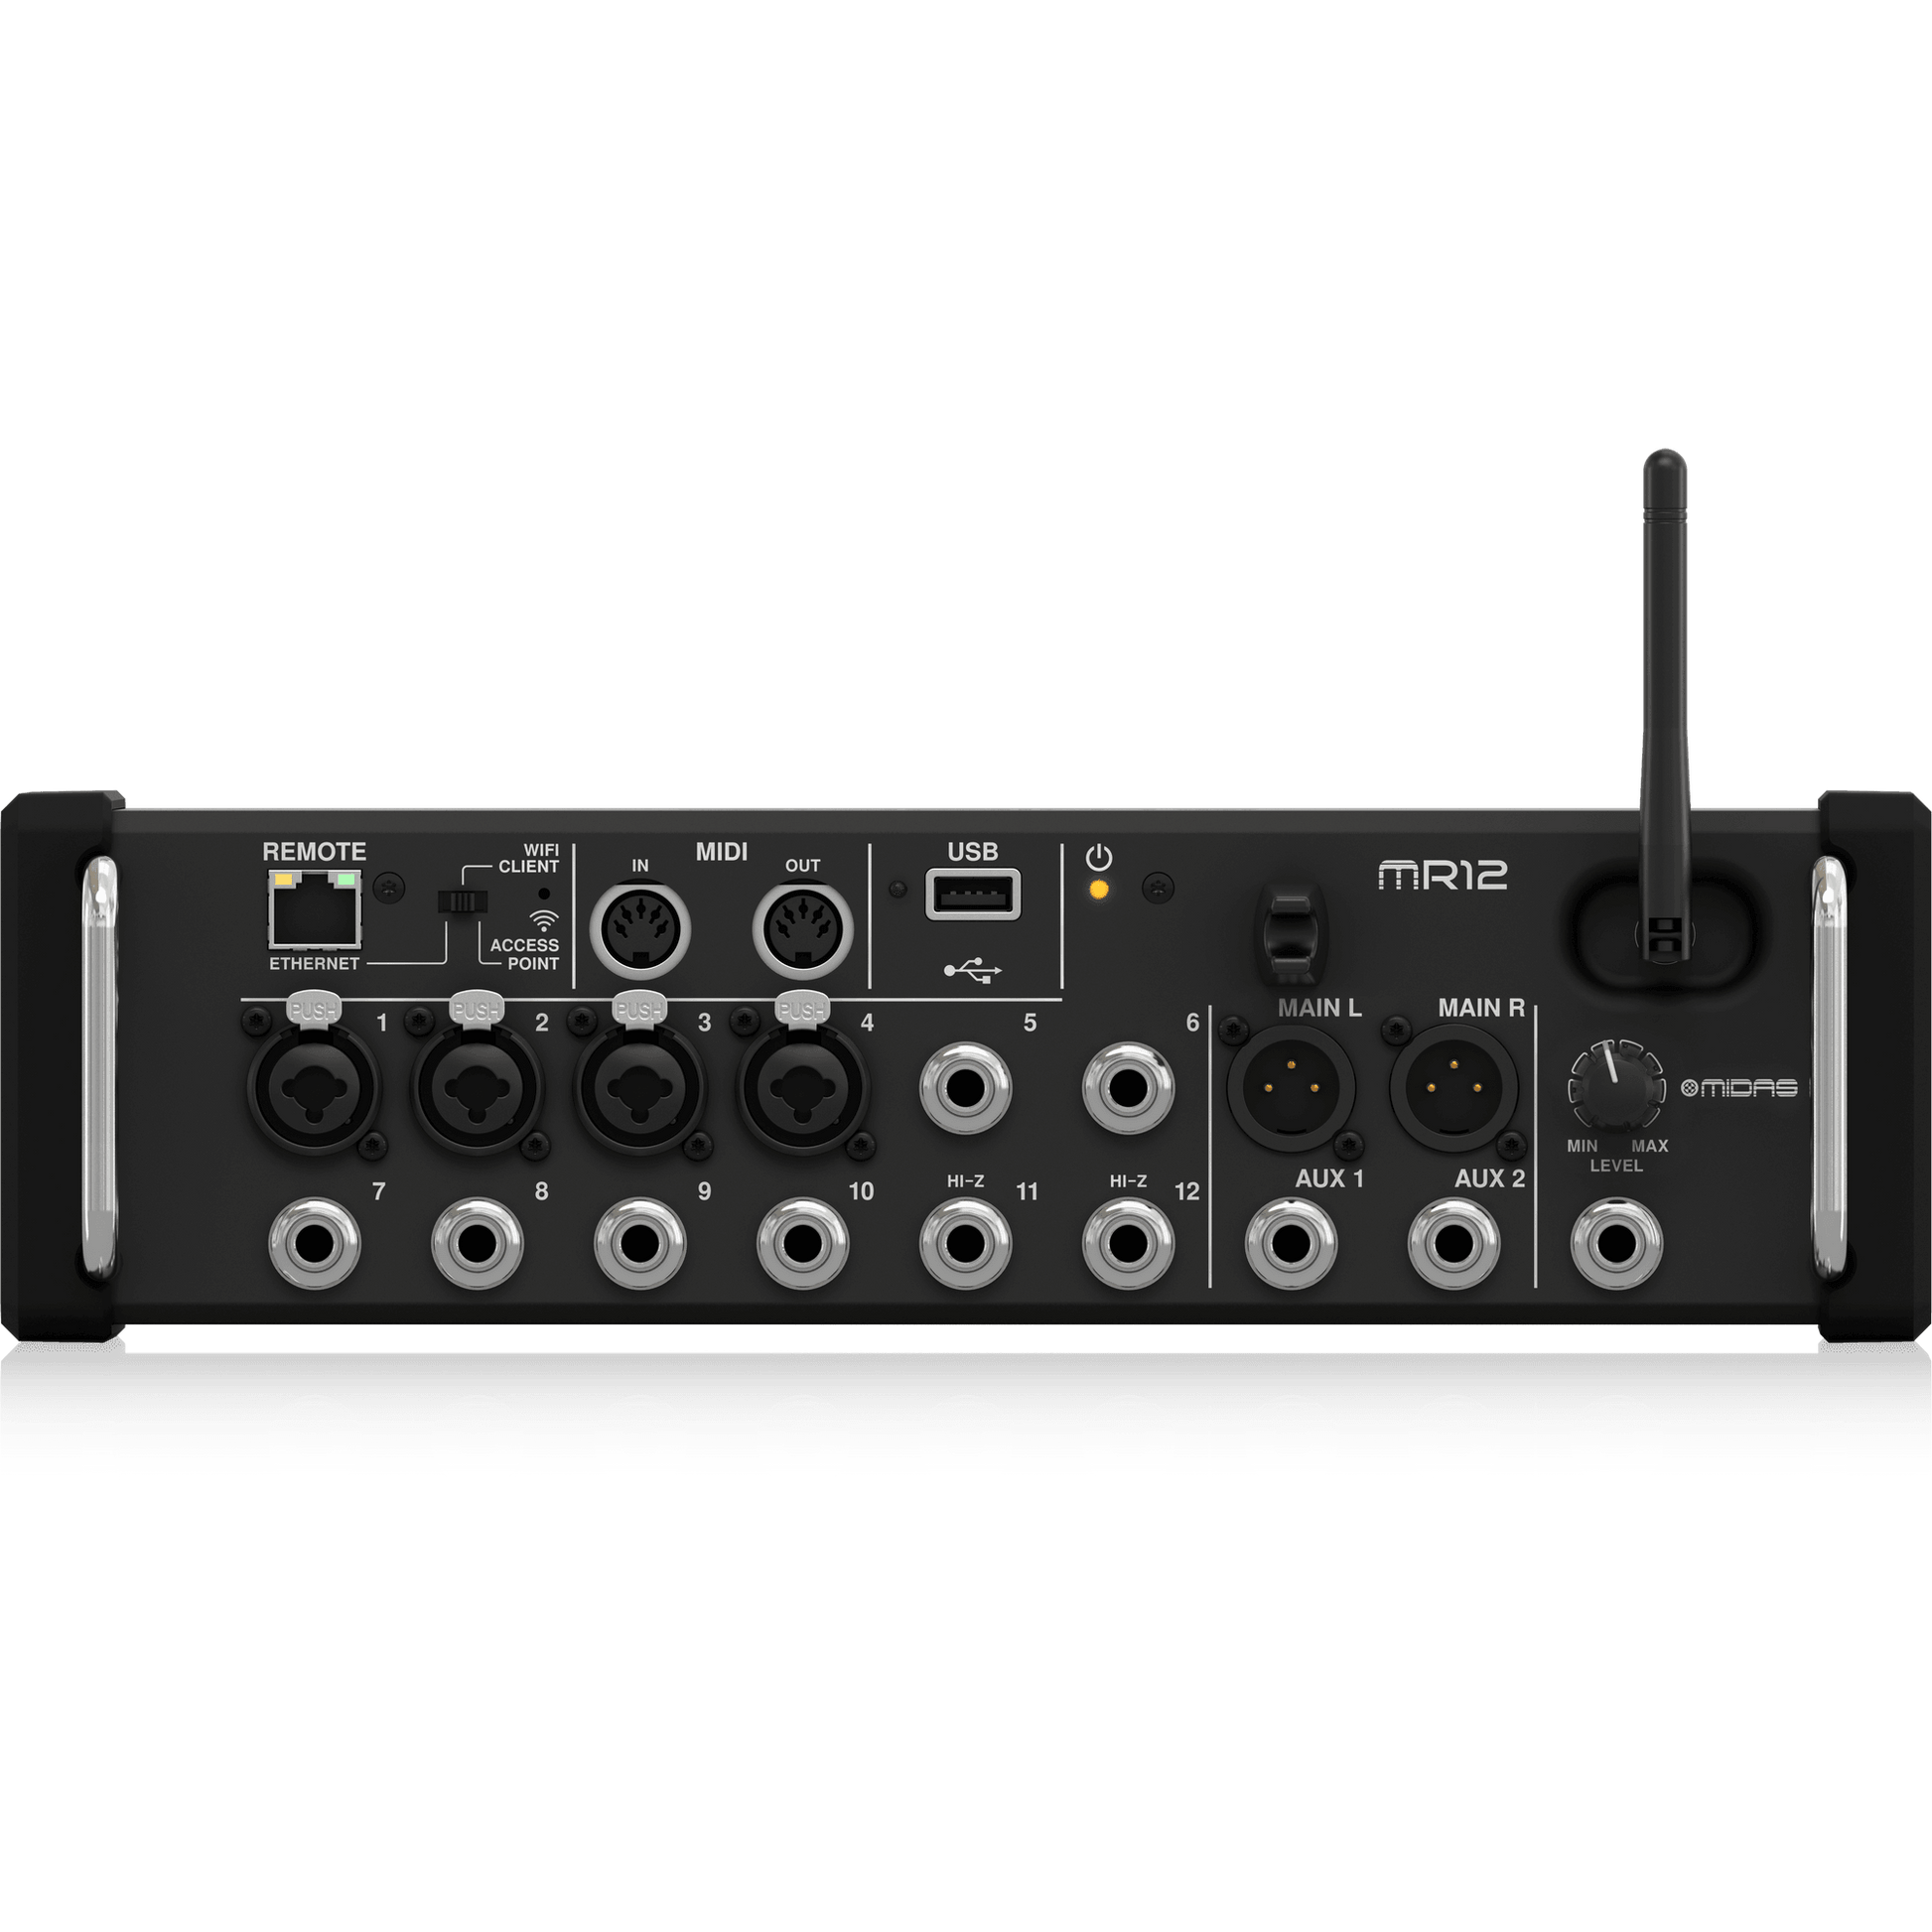 Midas-MR12 12-Input Digital Mixer for iPad/Android Tablets with 4 Midas PRO Preamps, 8 Line Inputs, Integrated Wifi Module and USB Stereo Recorder